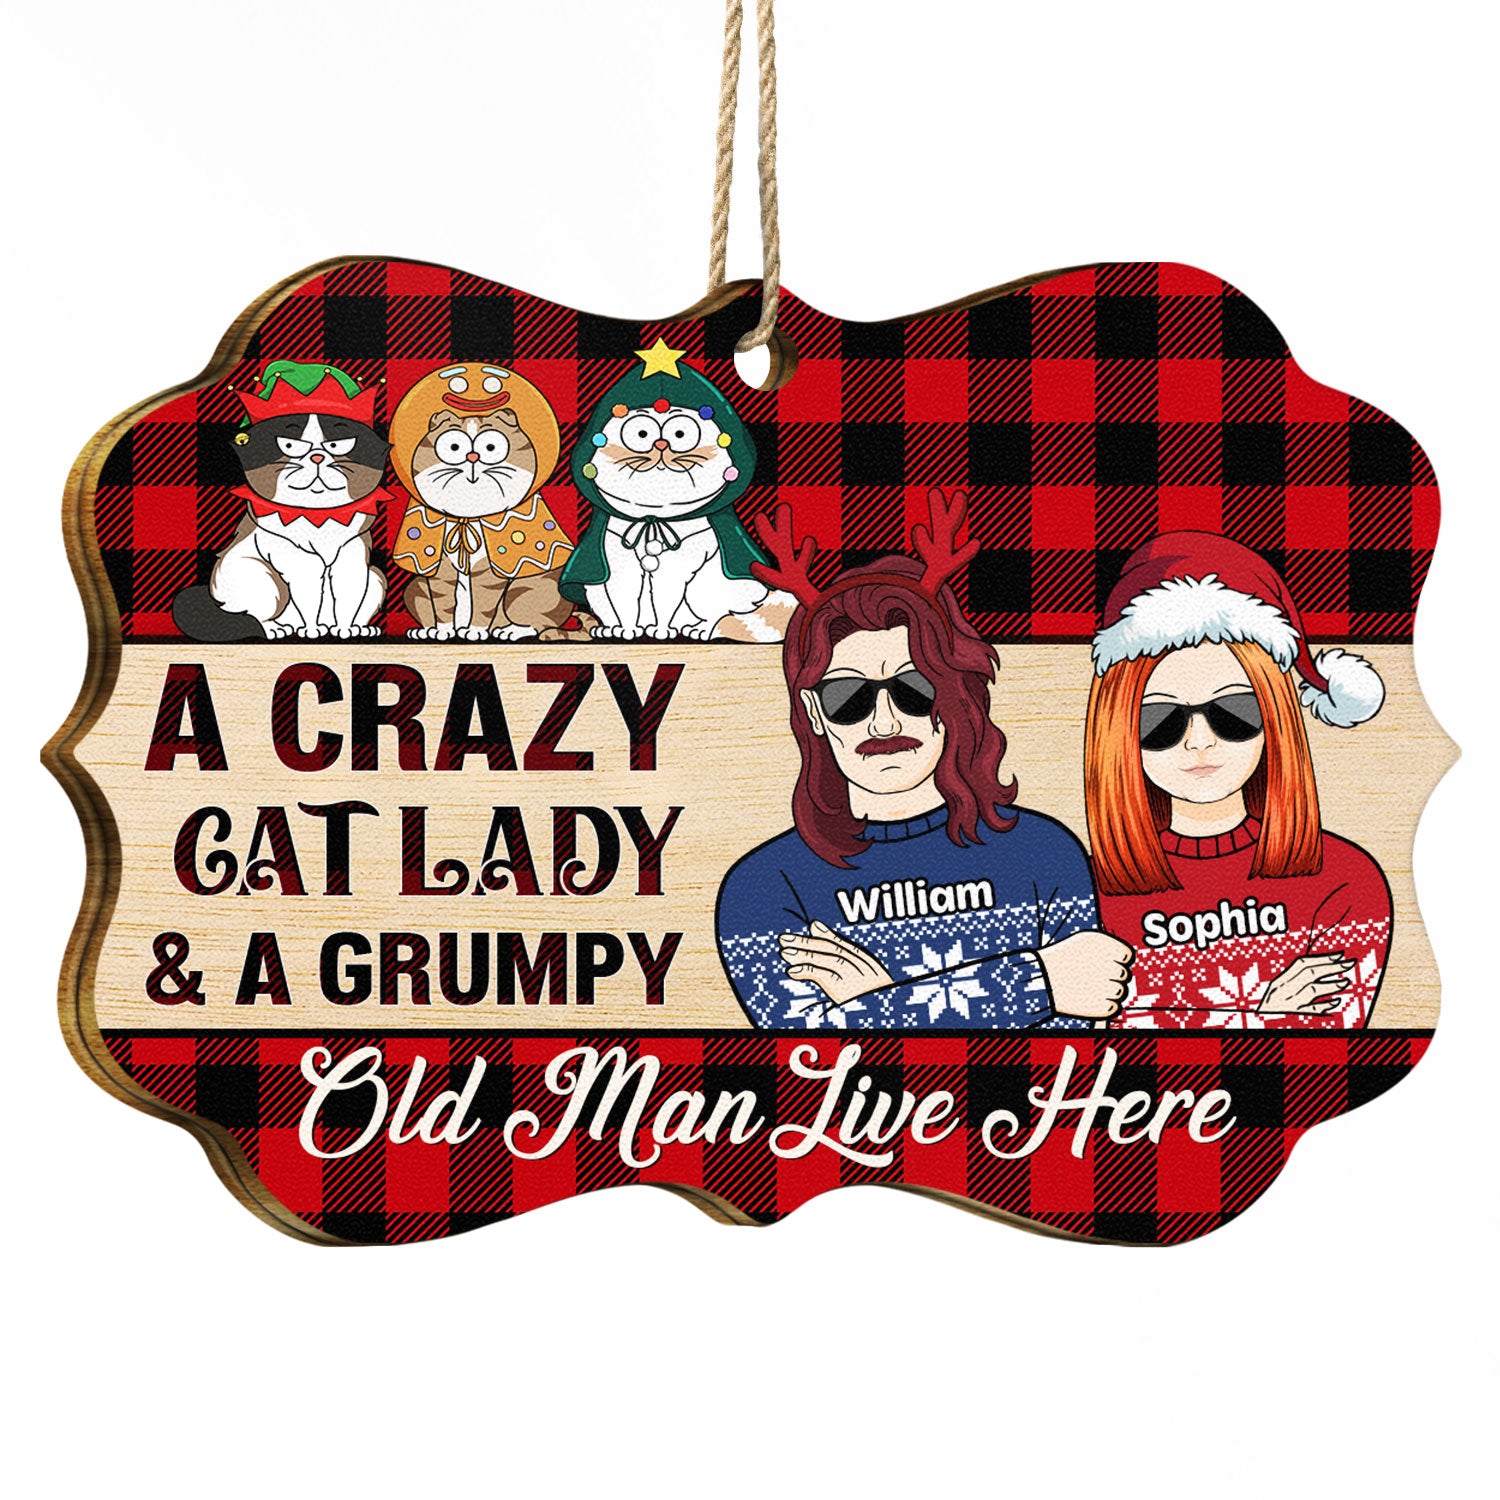 Crazy Cat Lady & Grumpy Old Man Live Here Funny Cartoon Cats - Christmas Gift For Cat Couples, Husband, Wife - Personalized Medallion Wooden Ornament